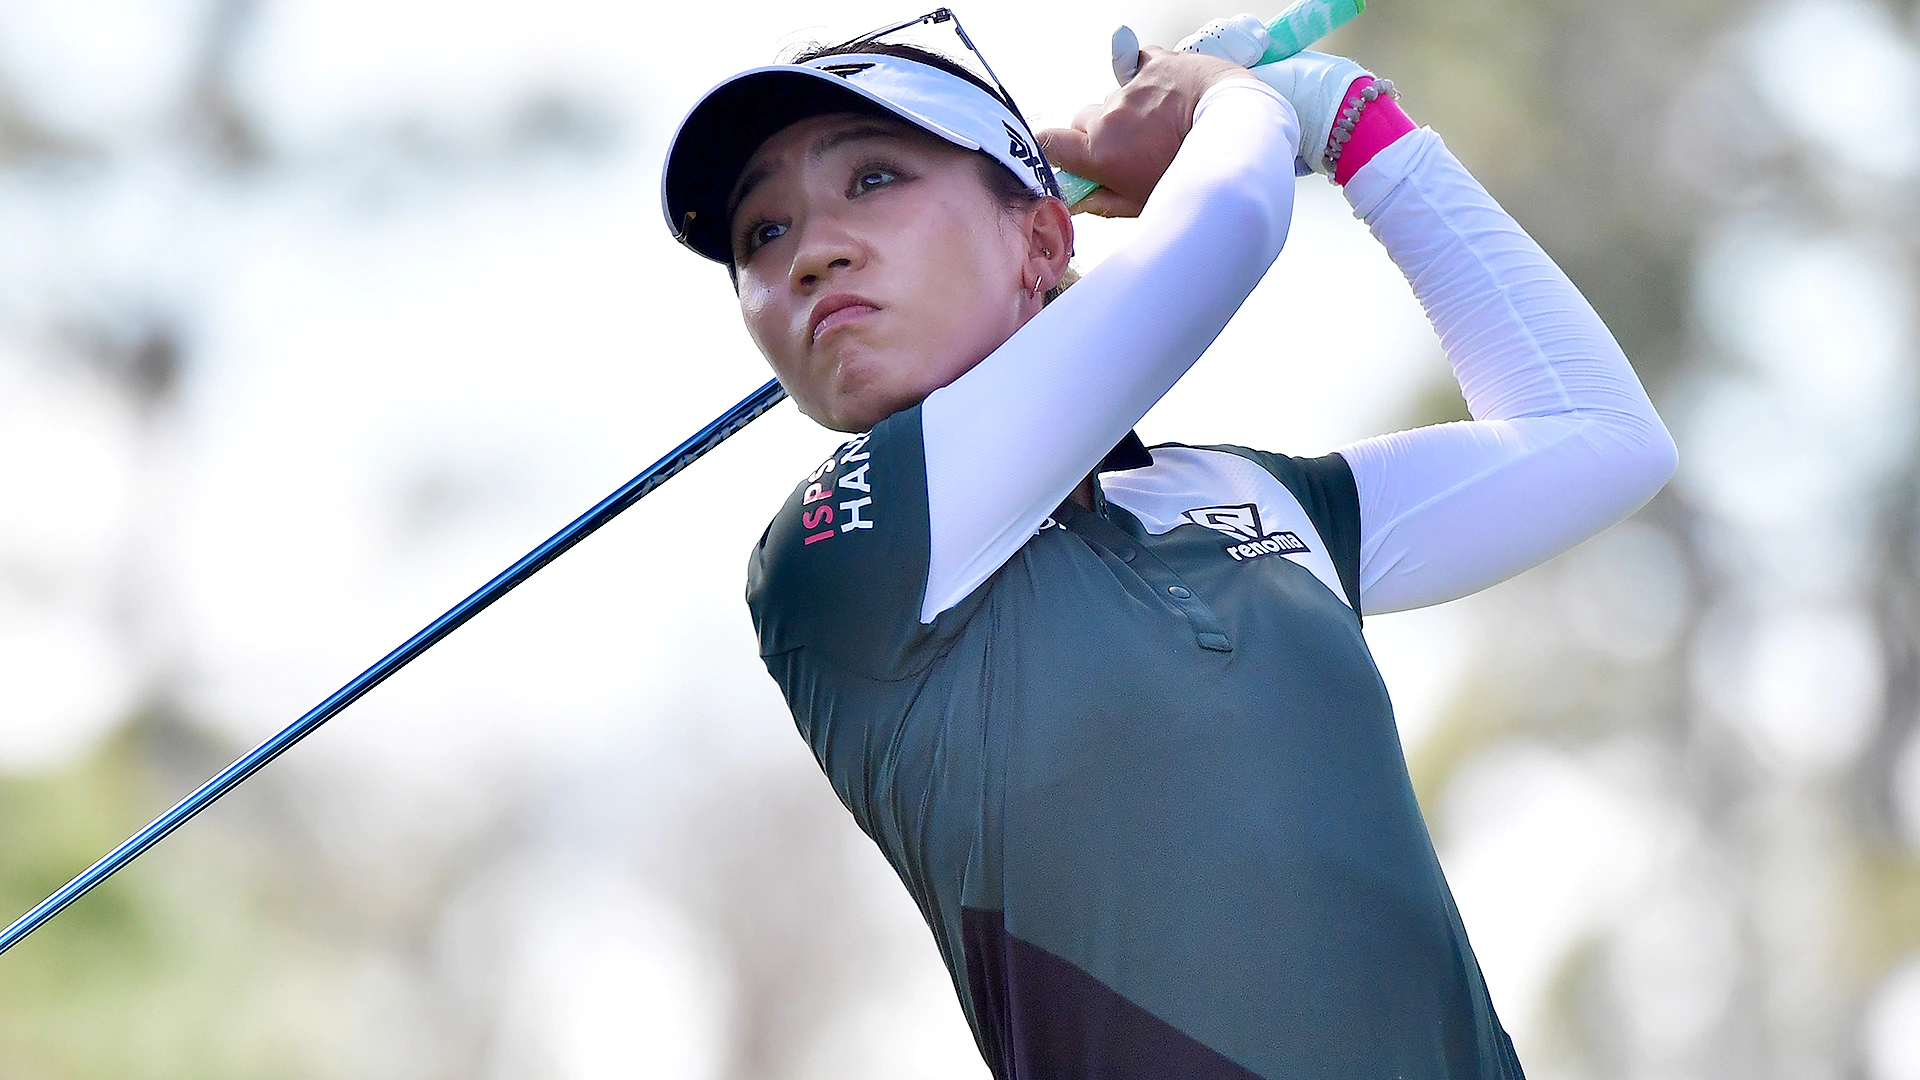 Lydia Ko makes 10 birdies, ties course record and leads by 4 in Saudi Arabia